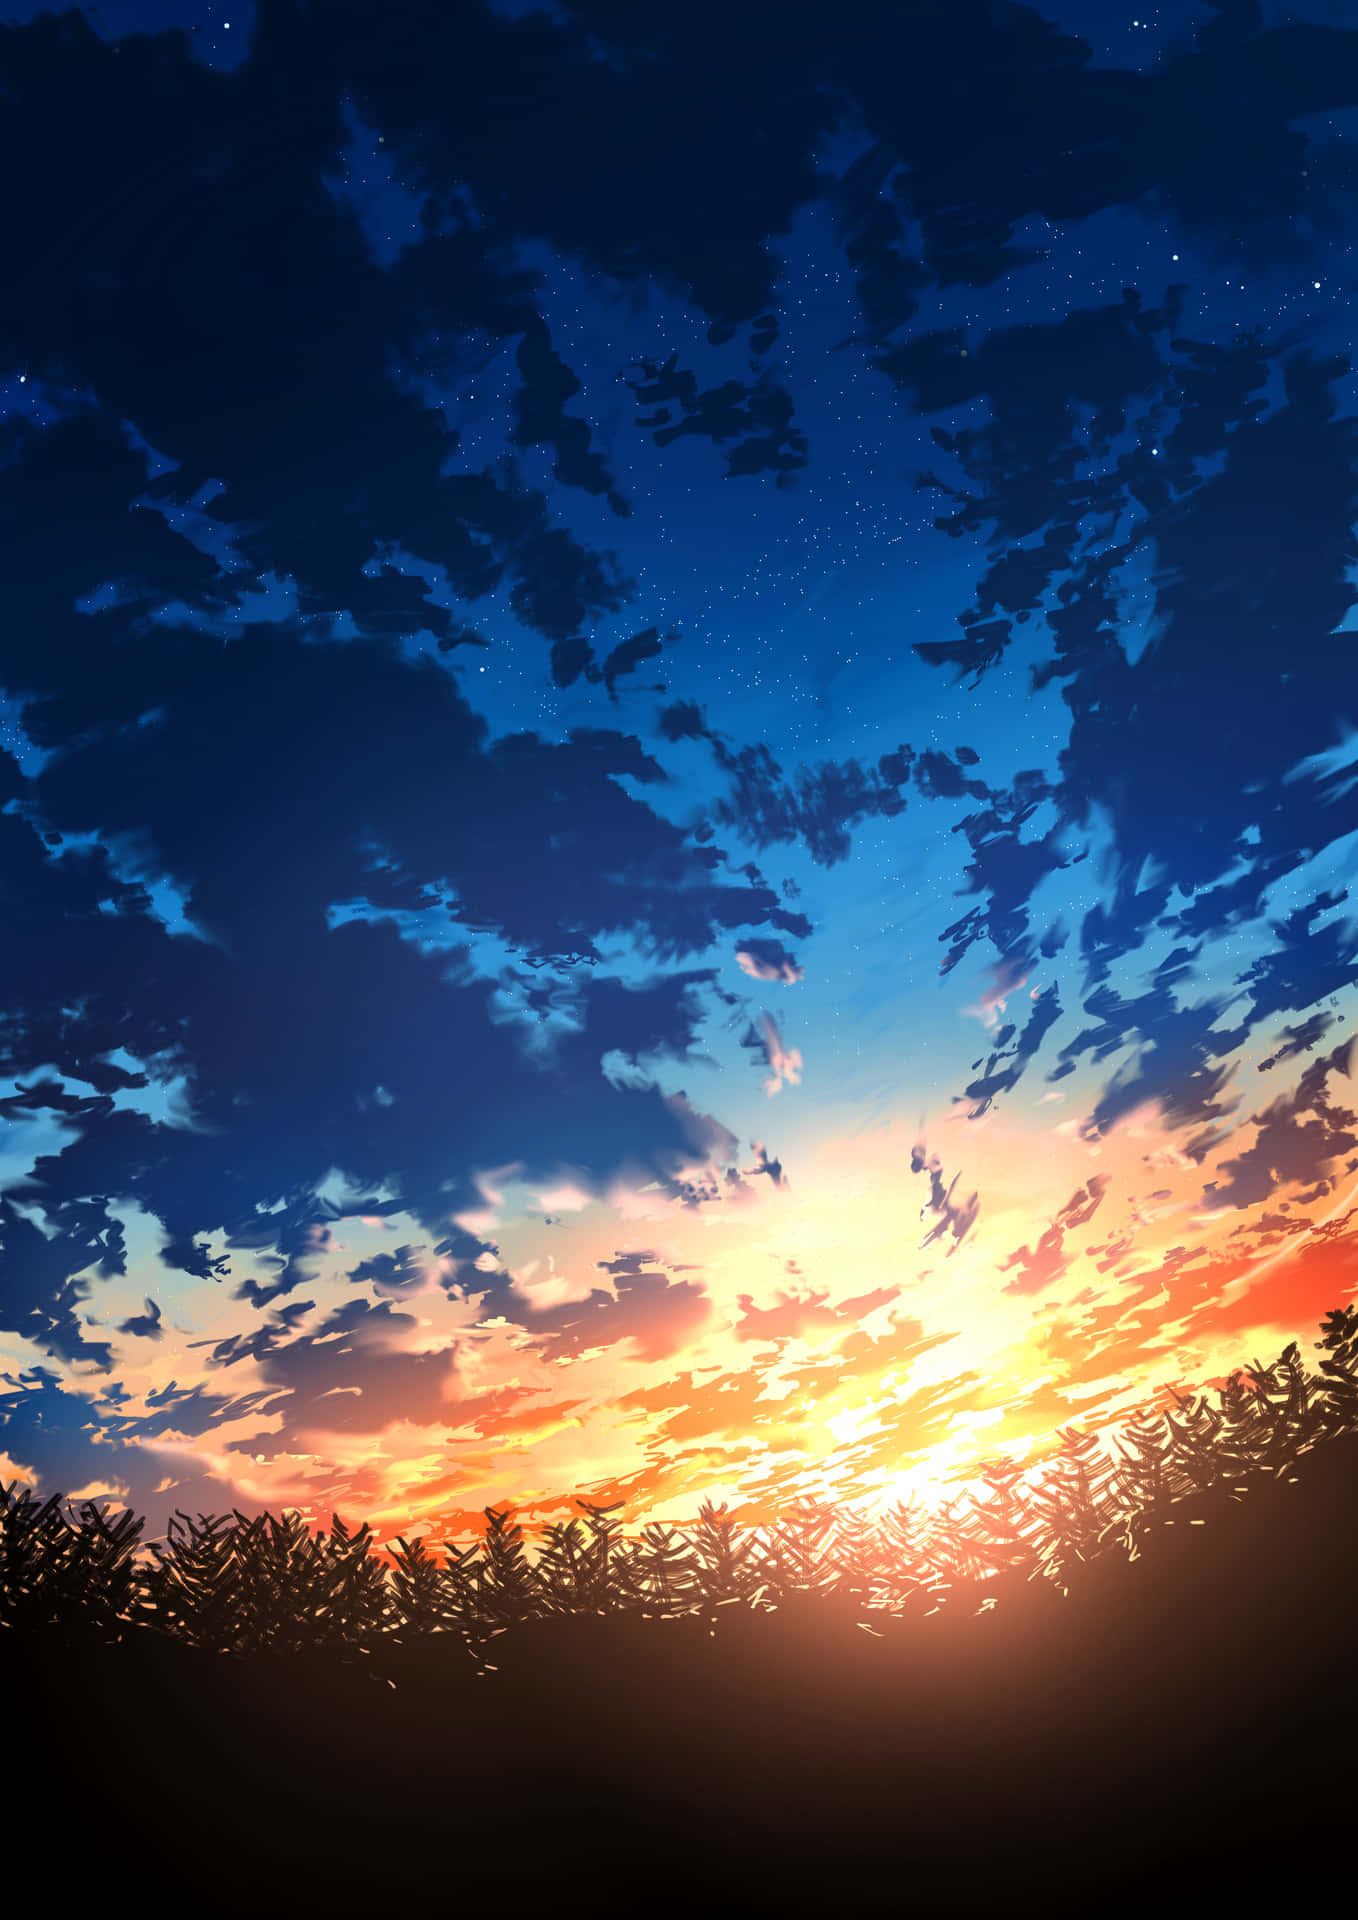 A peaceful evening at Anime Sunset Wallpaper